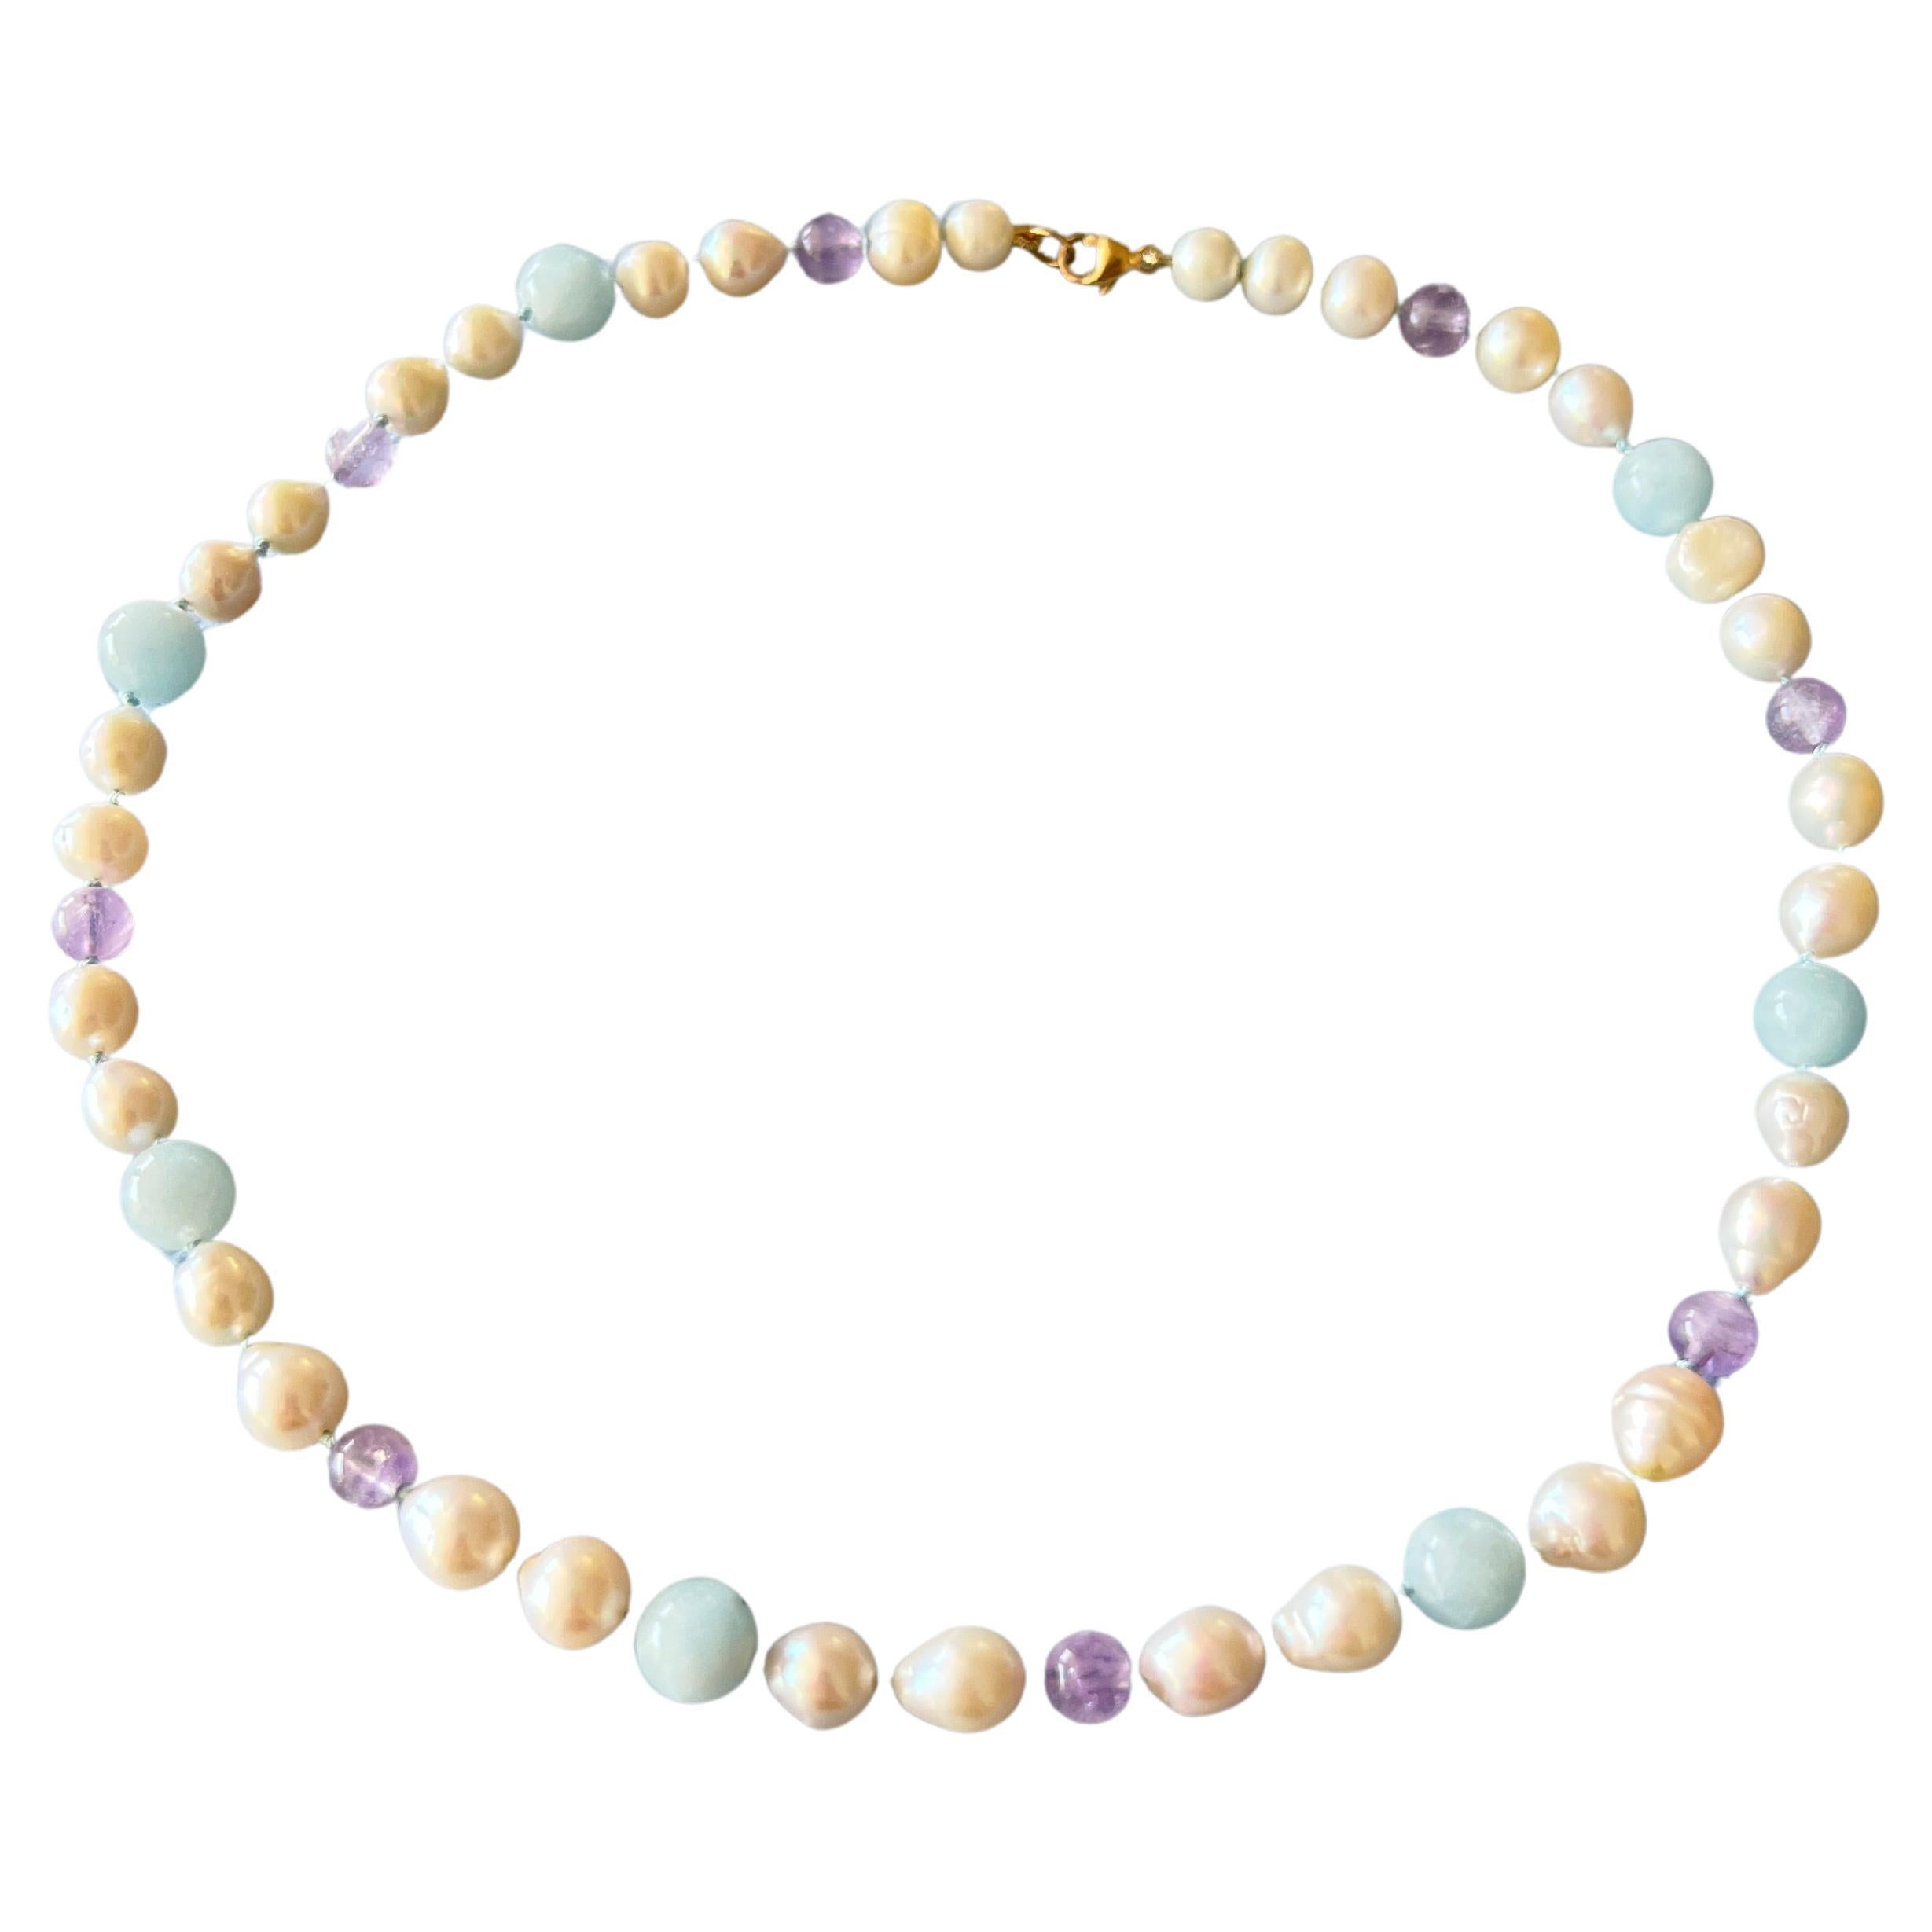 Round Cut Aquamarine Amethyst Pearl Choker Bead Necklace Gold Filled J Dauphin For Sale